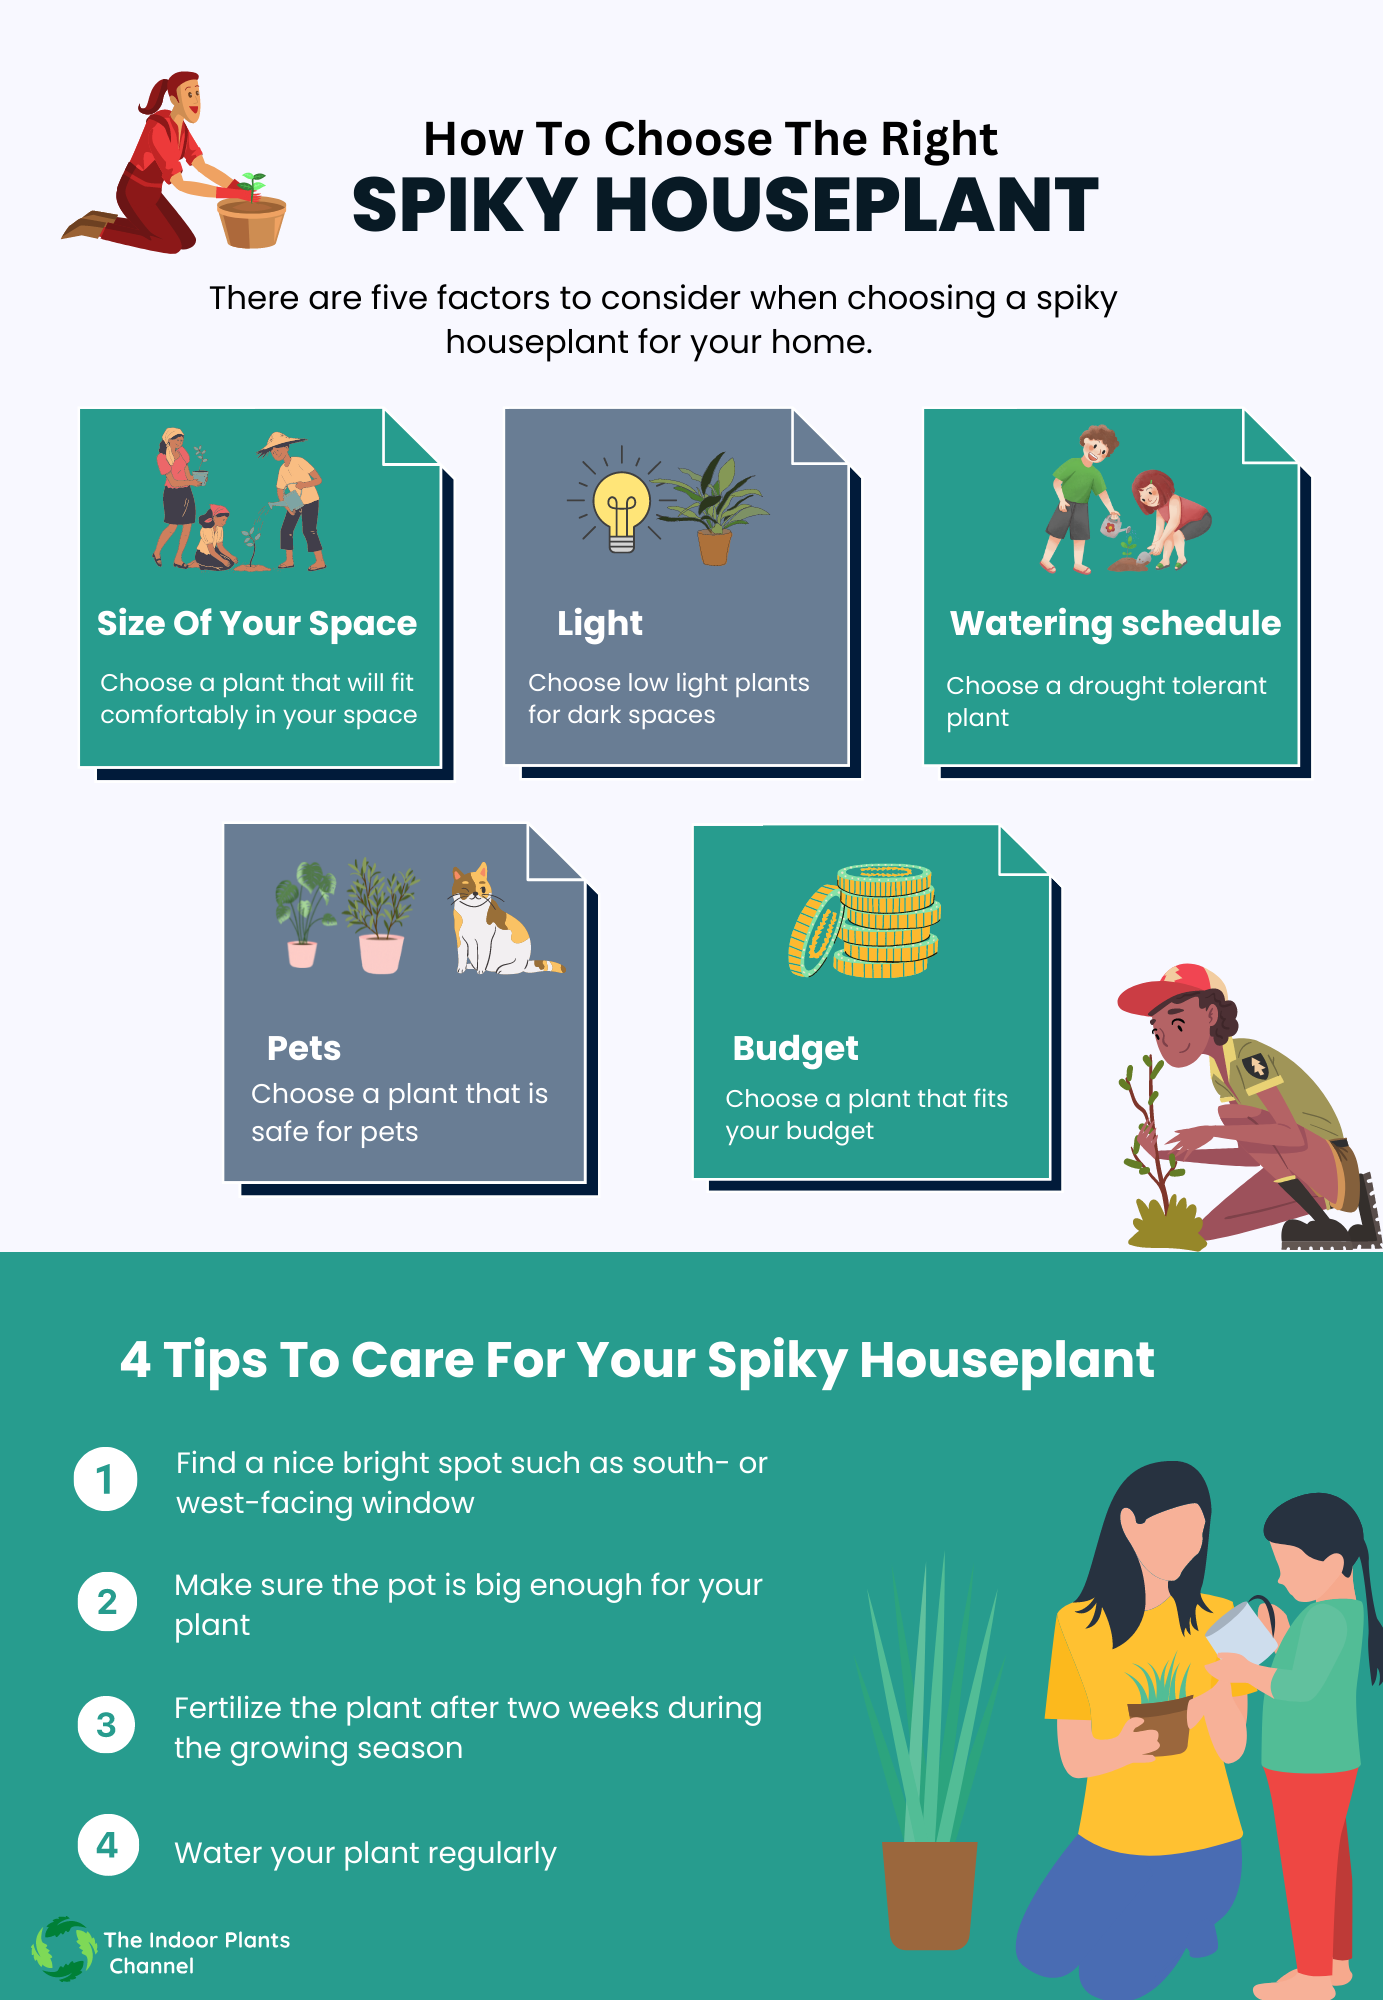 How To Choose The Right Spiky Houseplant